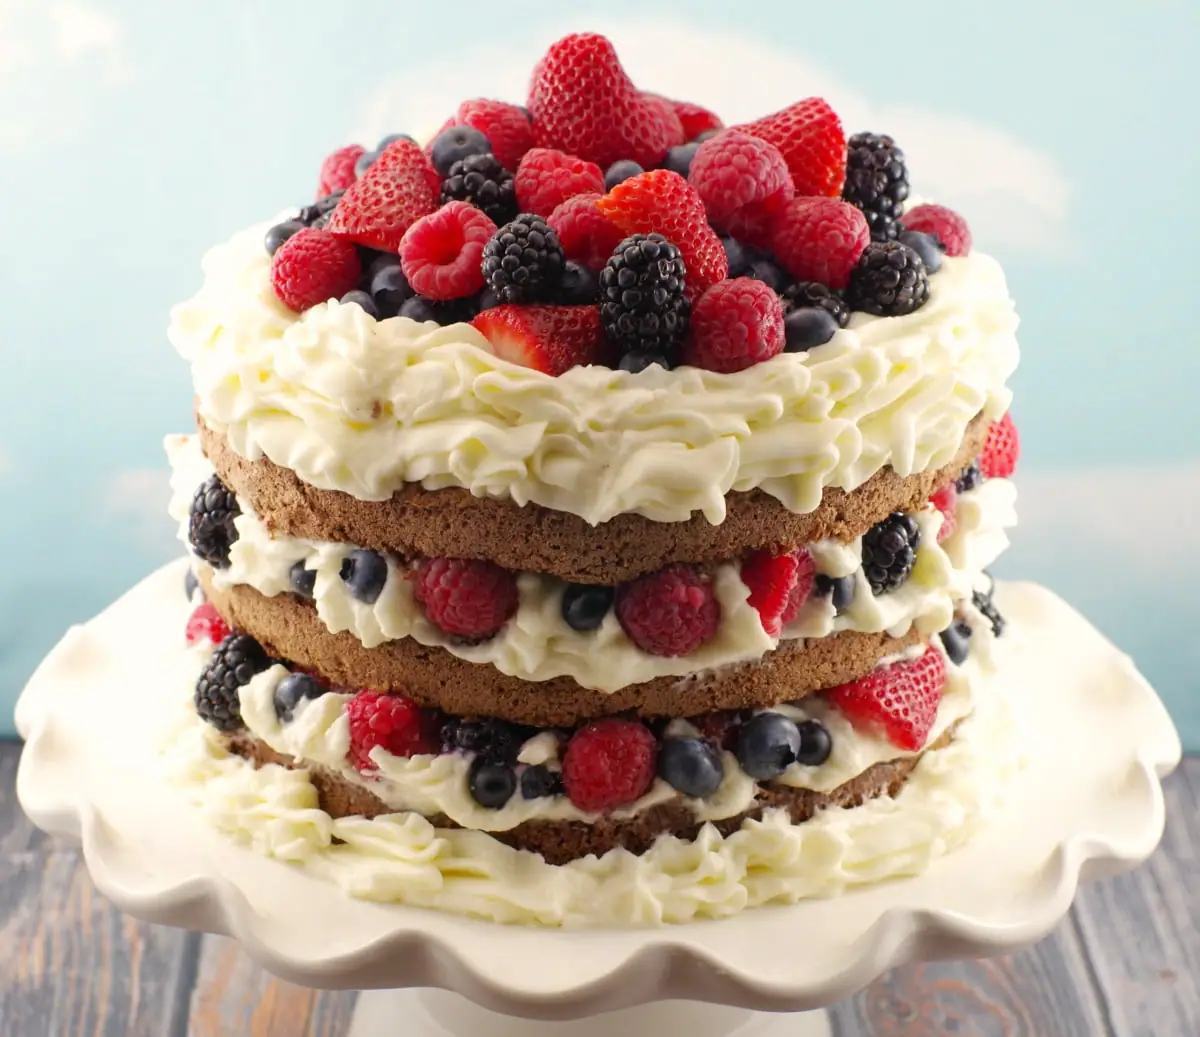 Italian Chocolate Sponge cake with summer berries, whipped cream icing and chocolate mousse